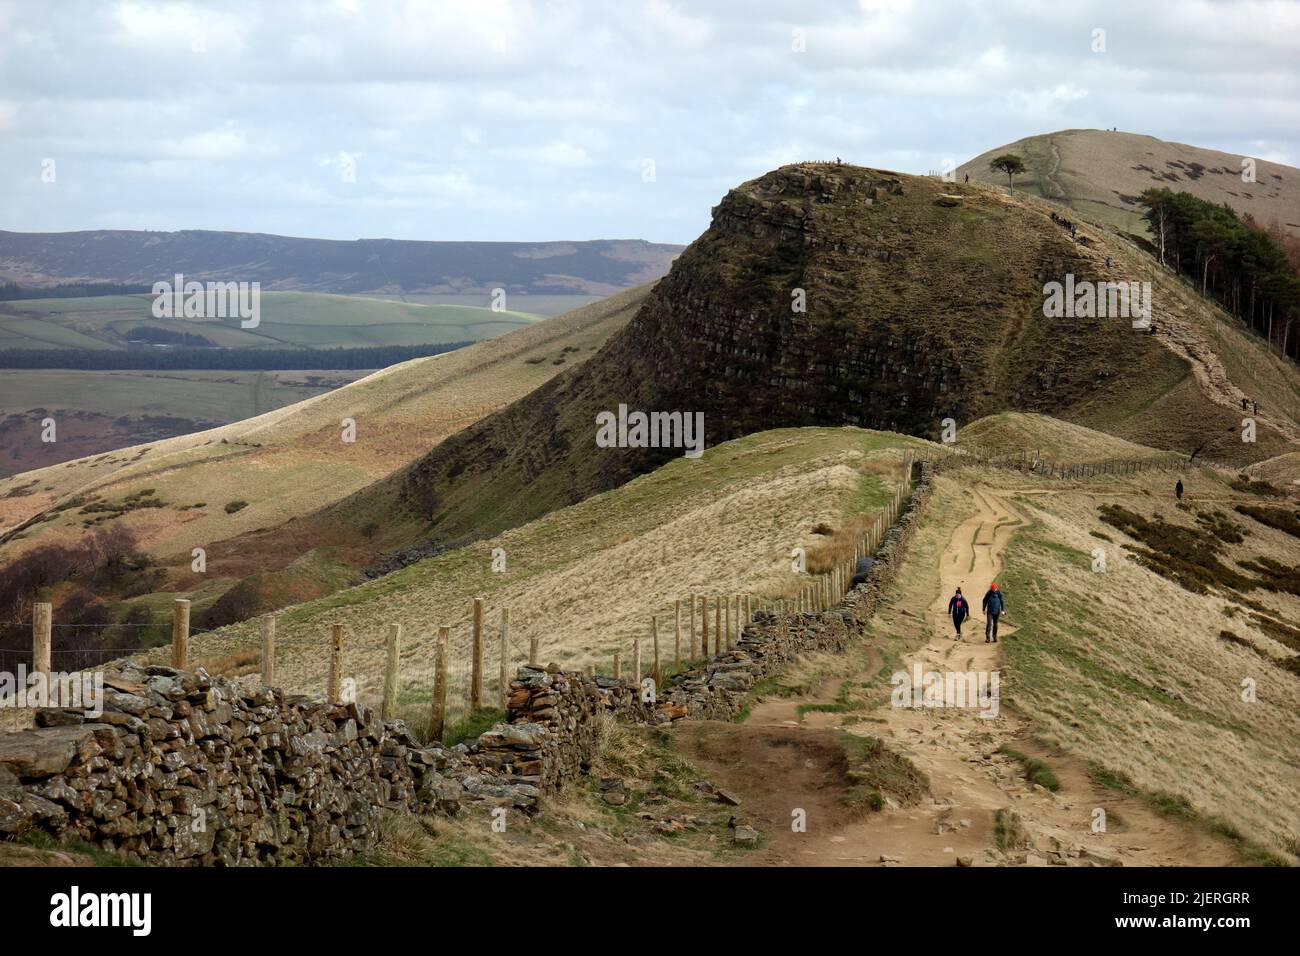 The Ridge Path over 'Black Tor' Leading to Distant 'Lose Hill' from 'Hollins Cross' in Edale, Derbyshire, Peak District National Park, England, UK. Stock Photo